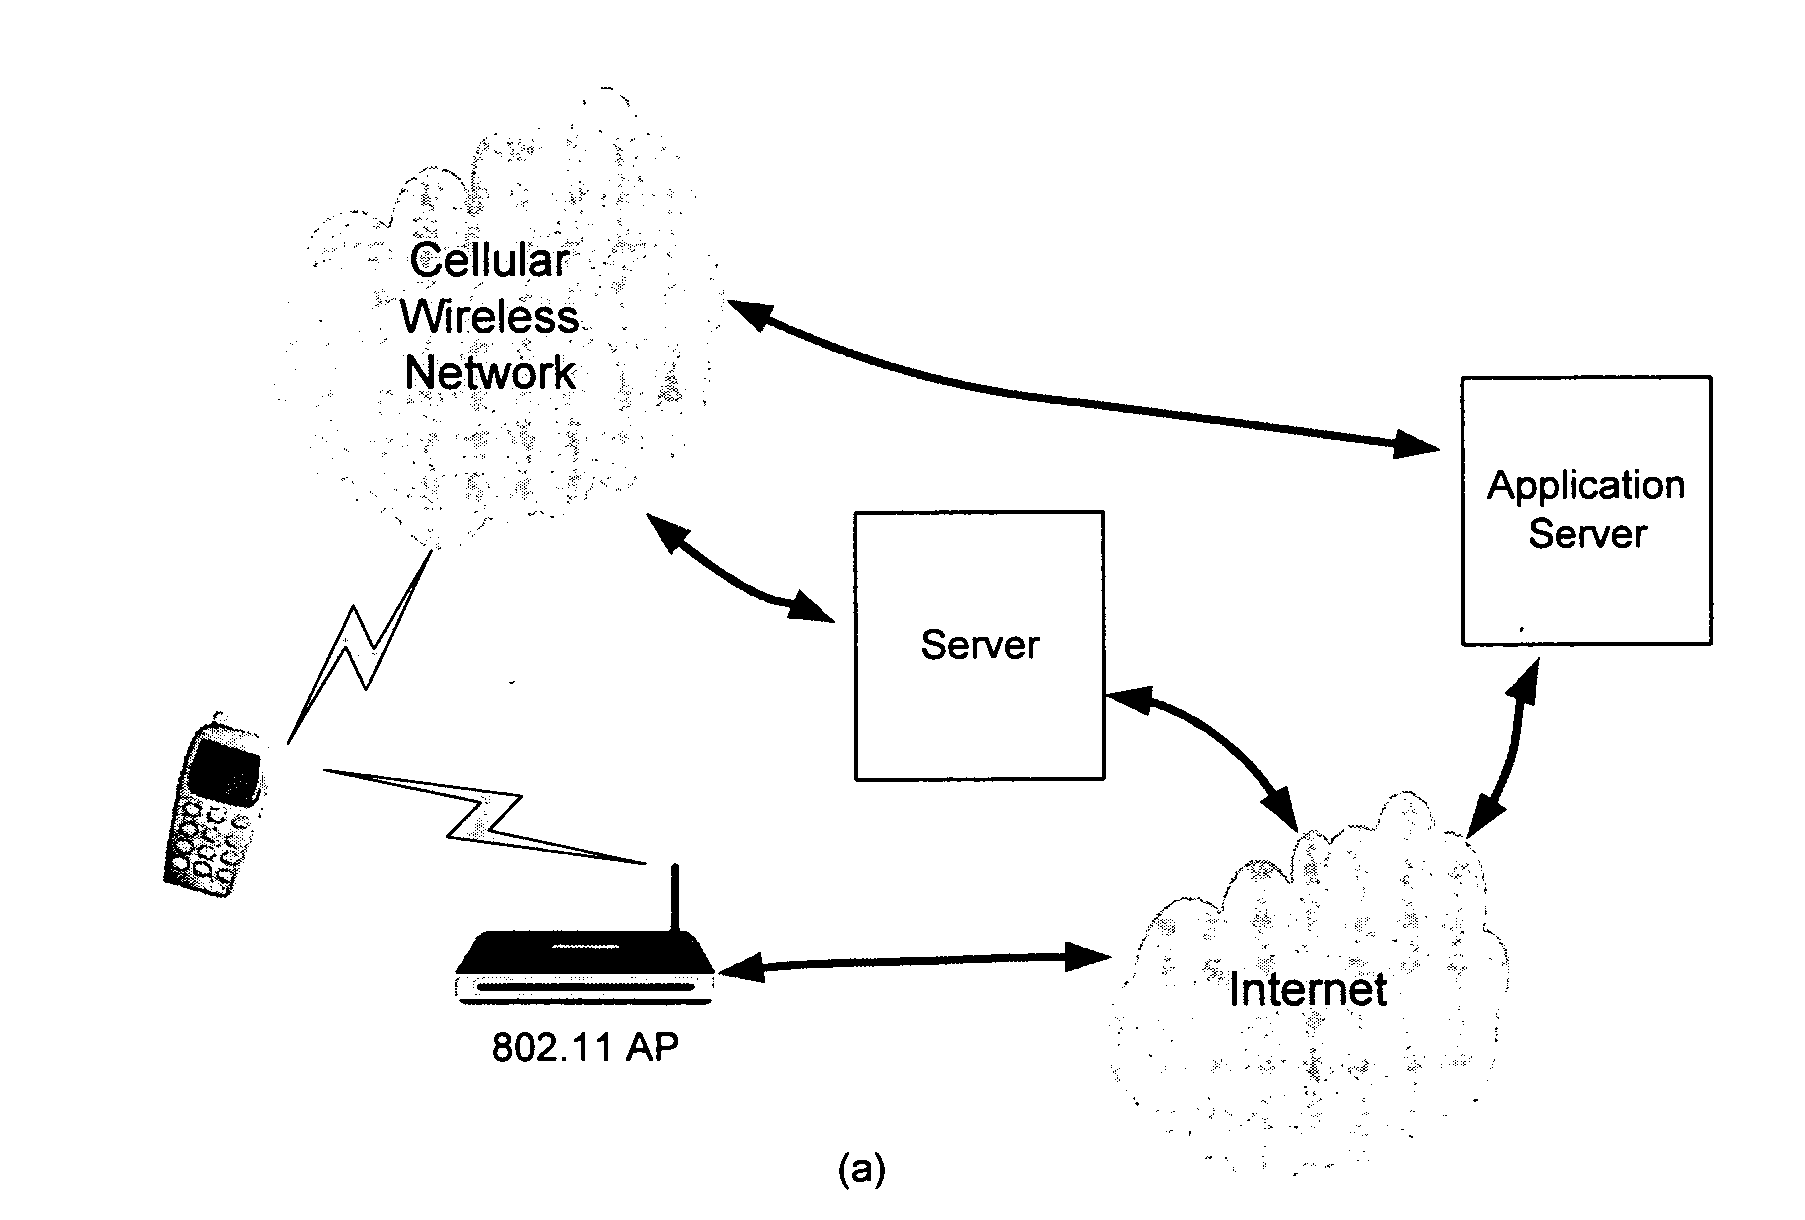 Location of wireless mobile terminals